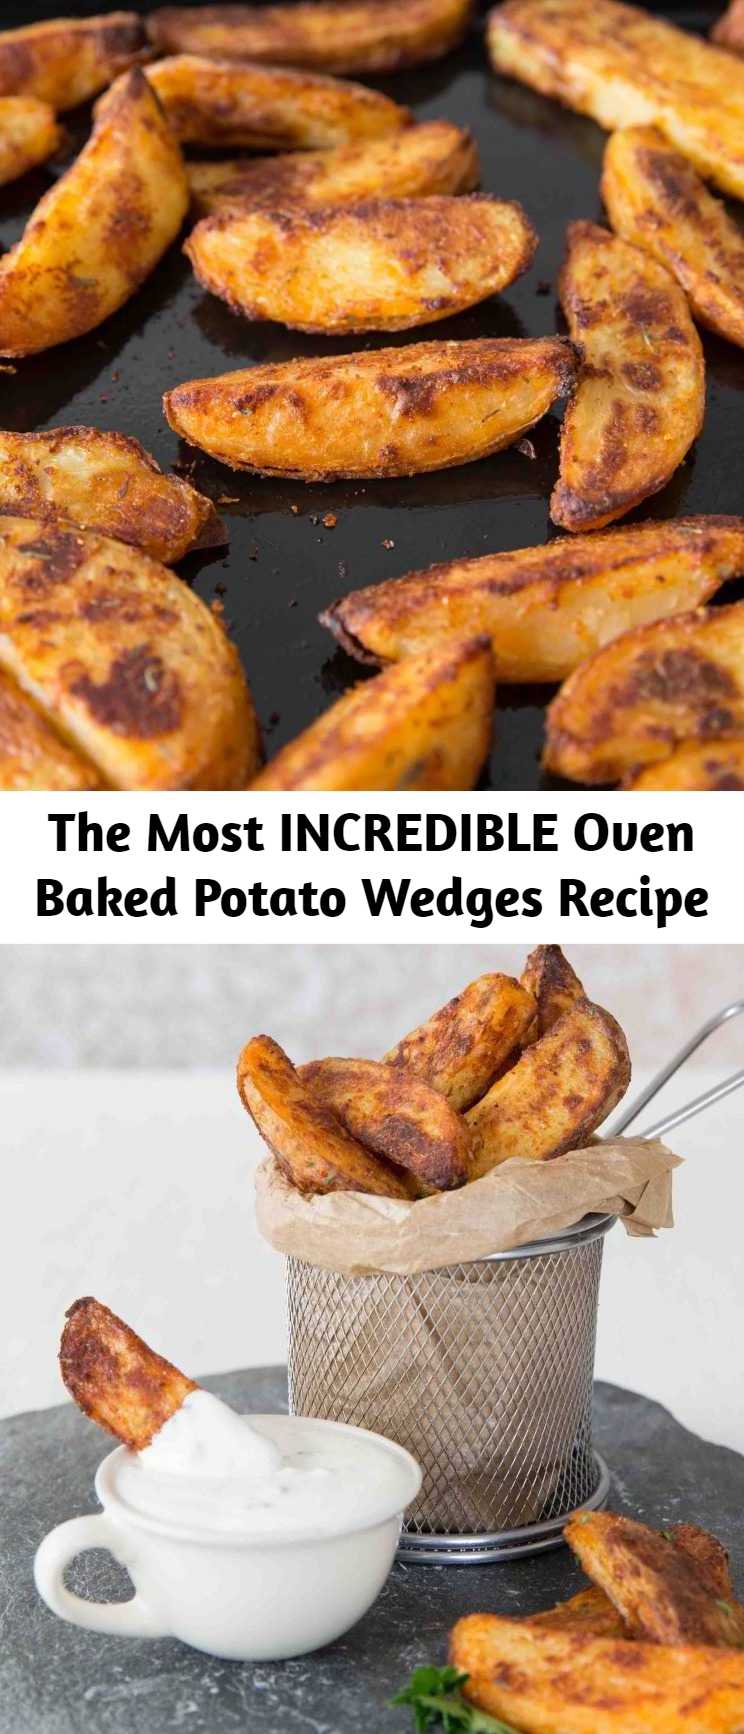 The Most INCREDIBLE Oven Baked Potato Wedges Recipe - Here I share with you a some game changing tips to getting Oven Baked Potato Wedges that are crispy and crunchy on the outside, yet light and fluffy on the inside! #wedges #fingerfood #potatowedges #appetizers